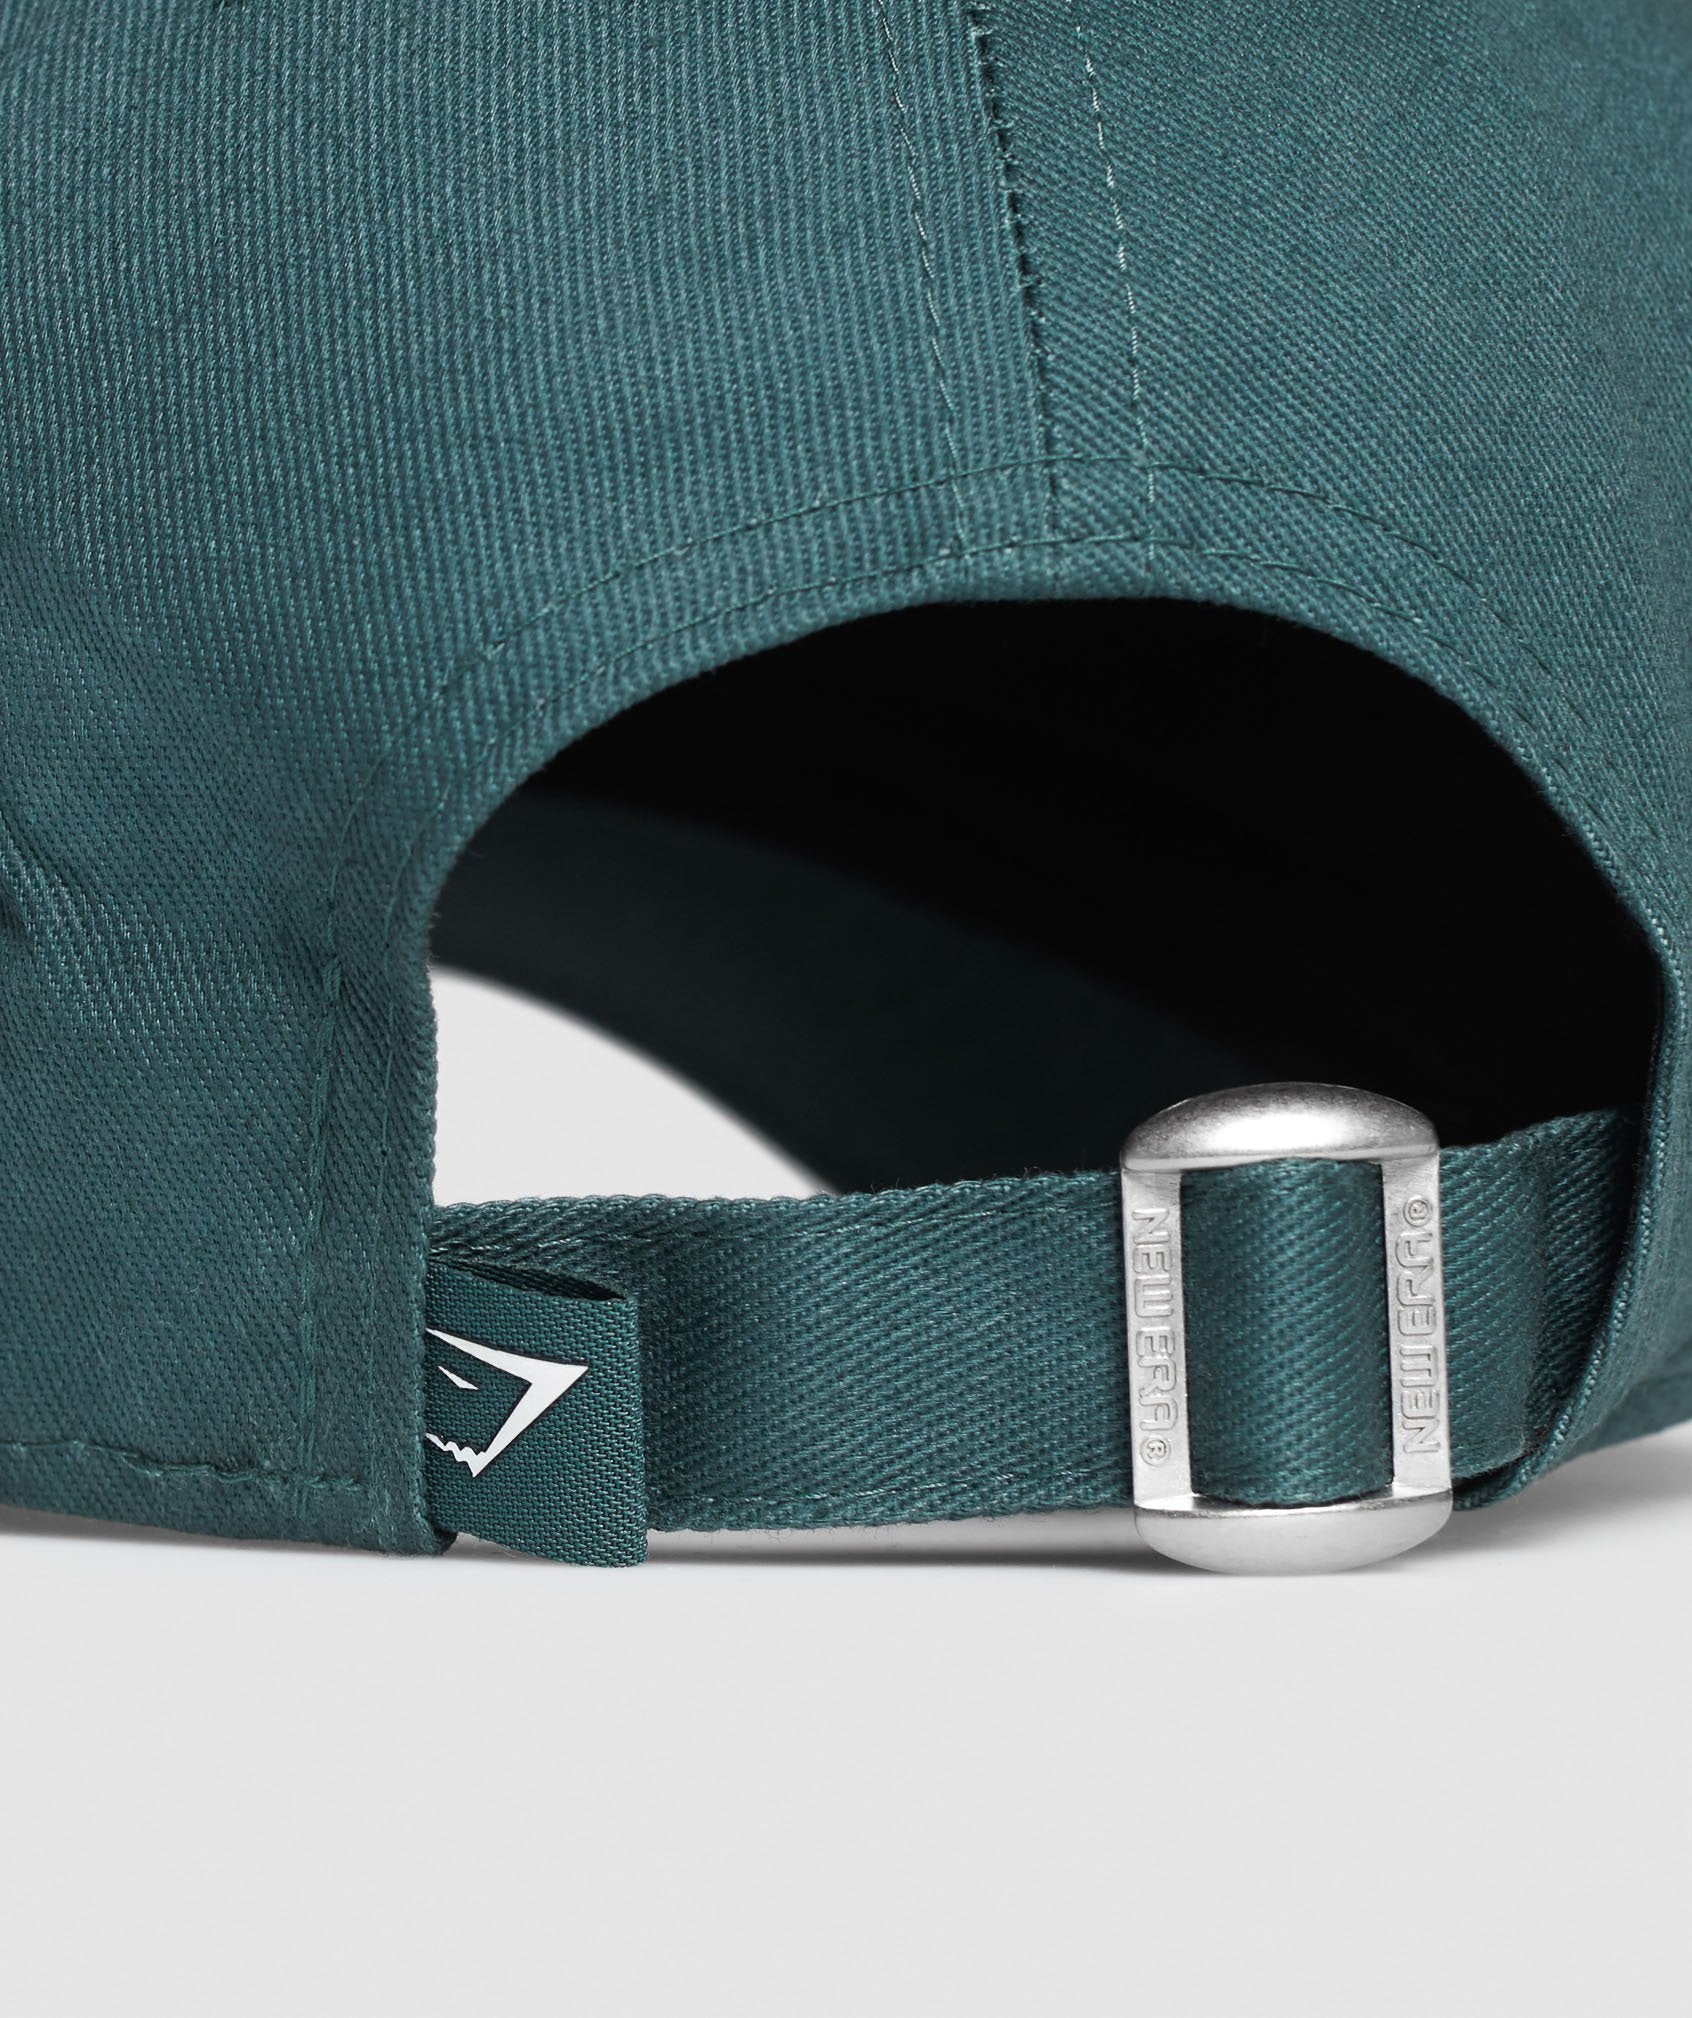 New Era 9FORTY Adjustable in Turquoise - view 6